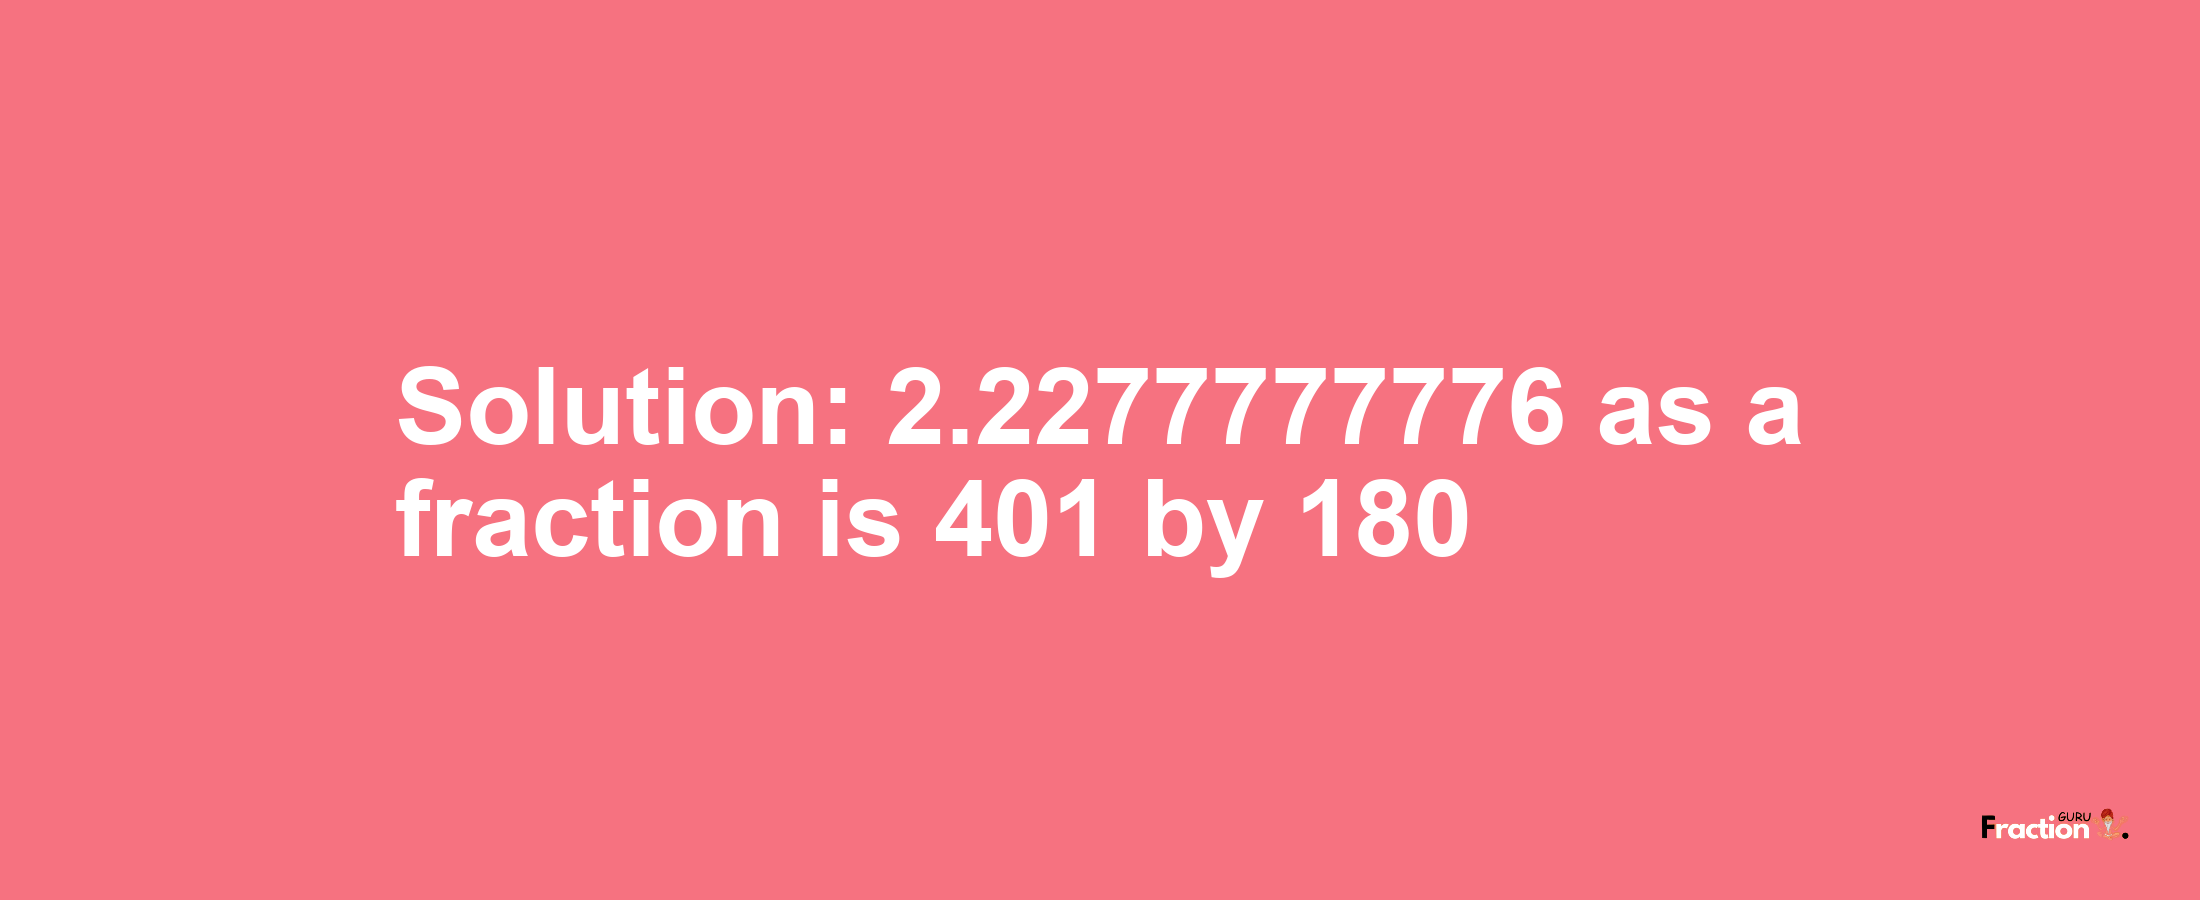 Solution:2.2277777776 as a fraction is 401/180